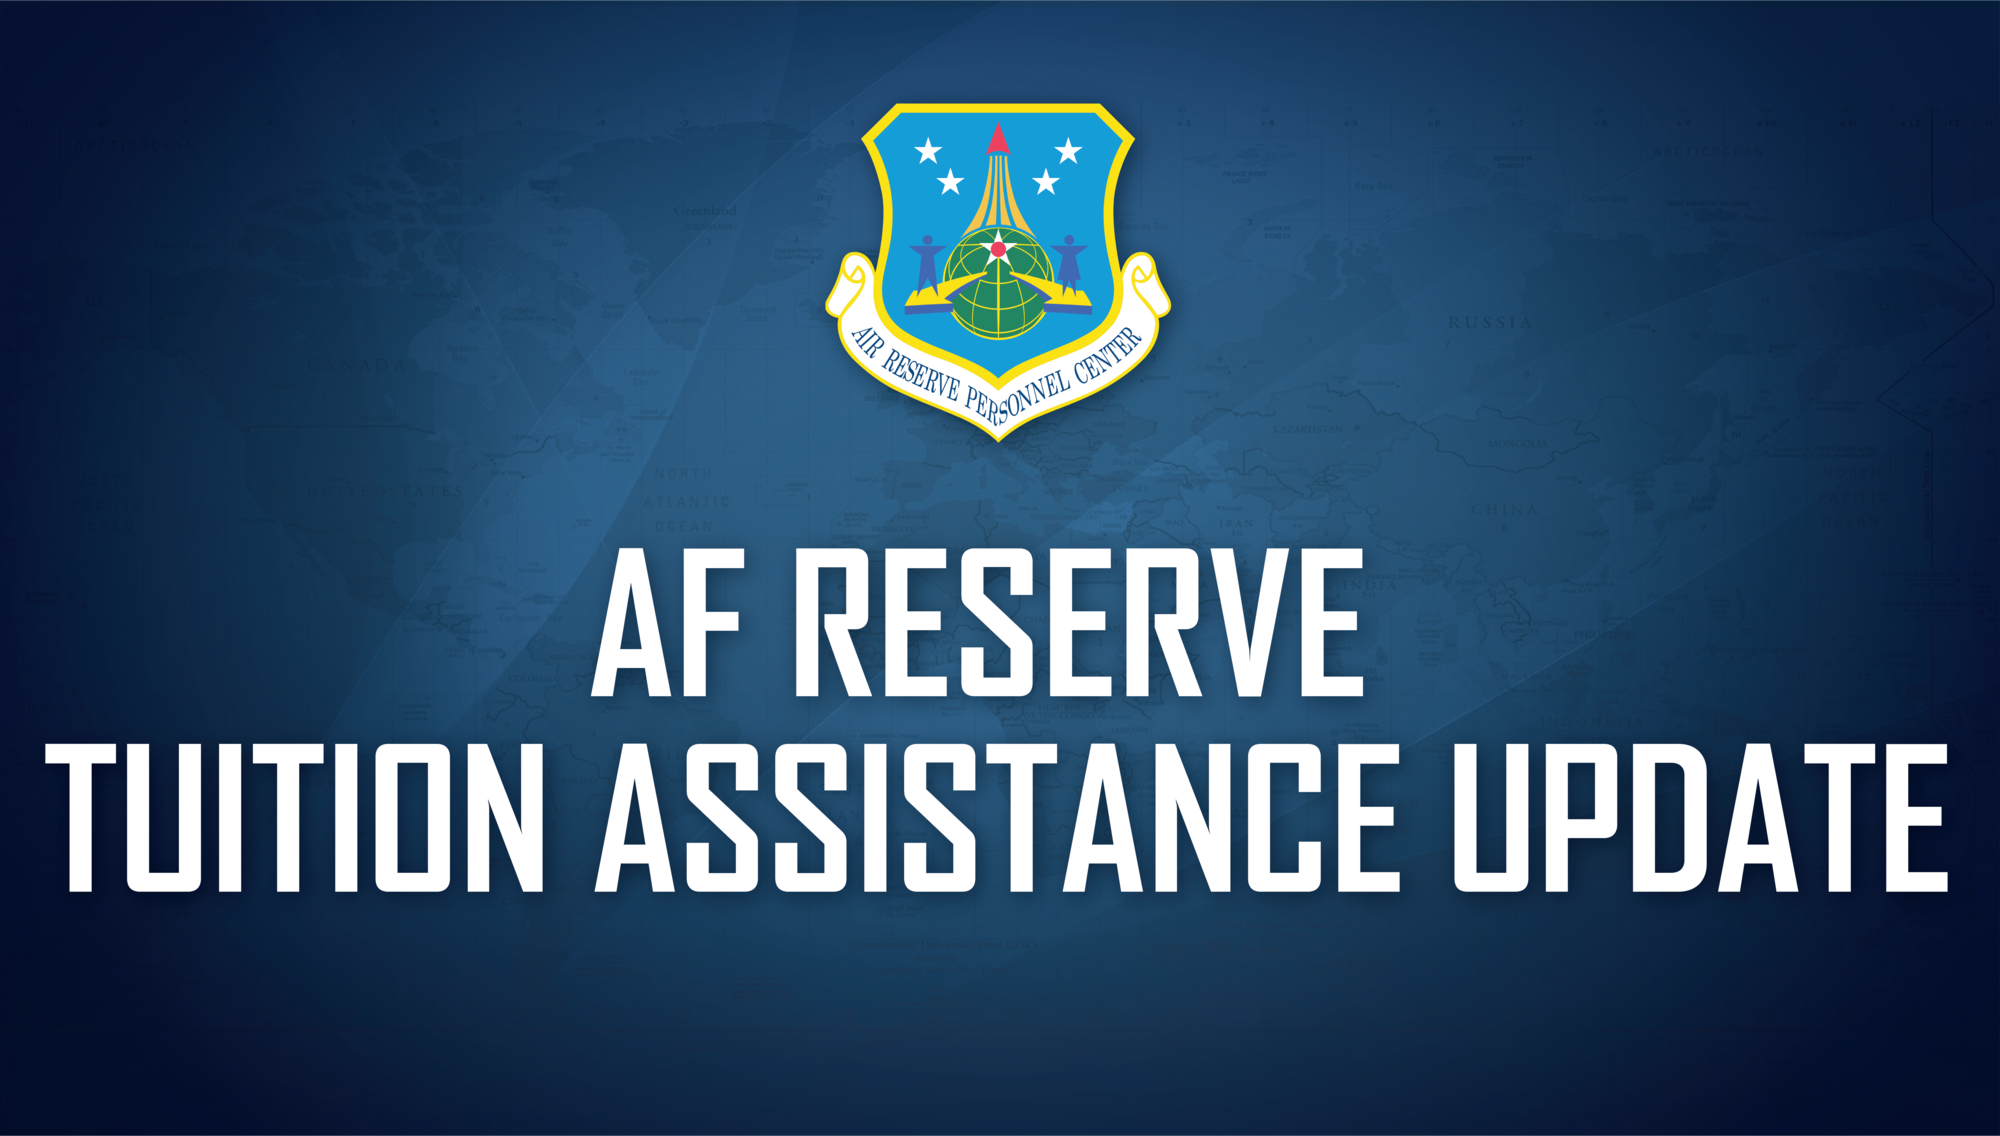 Department of the Air Force officials recently announced a reduction in tuition assistance benefits from $4,500 to $3,750 per fiscal year. This change, however, applies only to the military tuition assistance program (MilTA) and does not impact the Reserve tuition assistance program (ResTA).